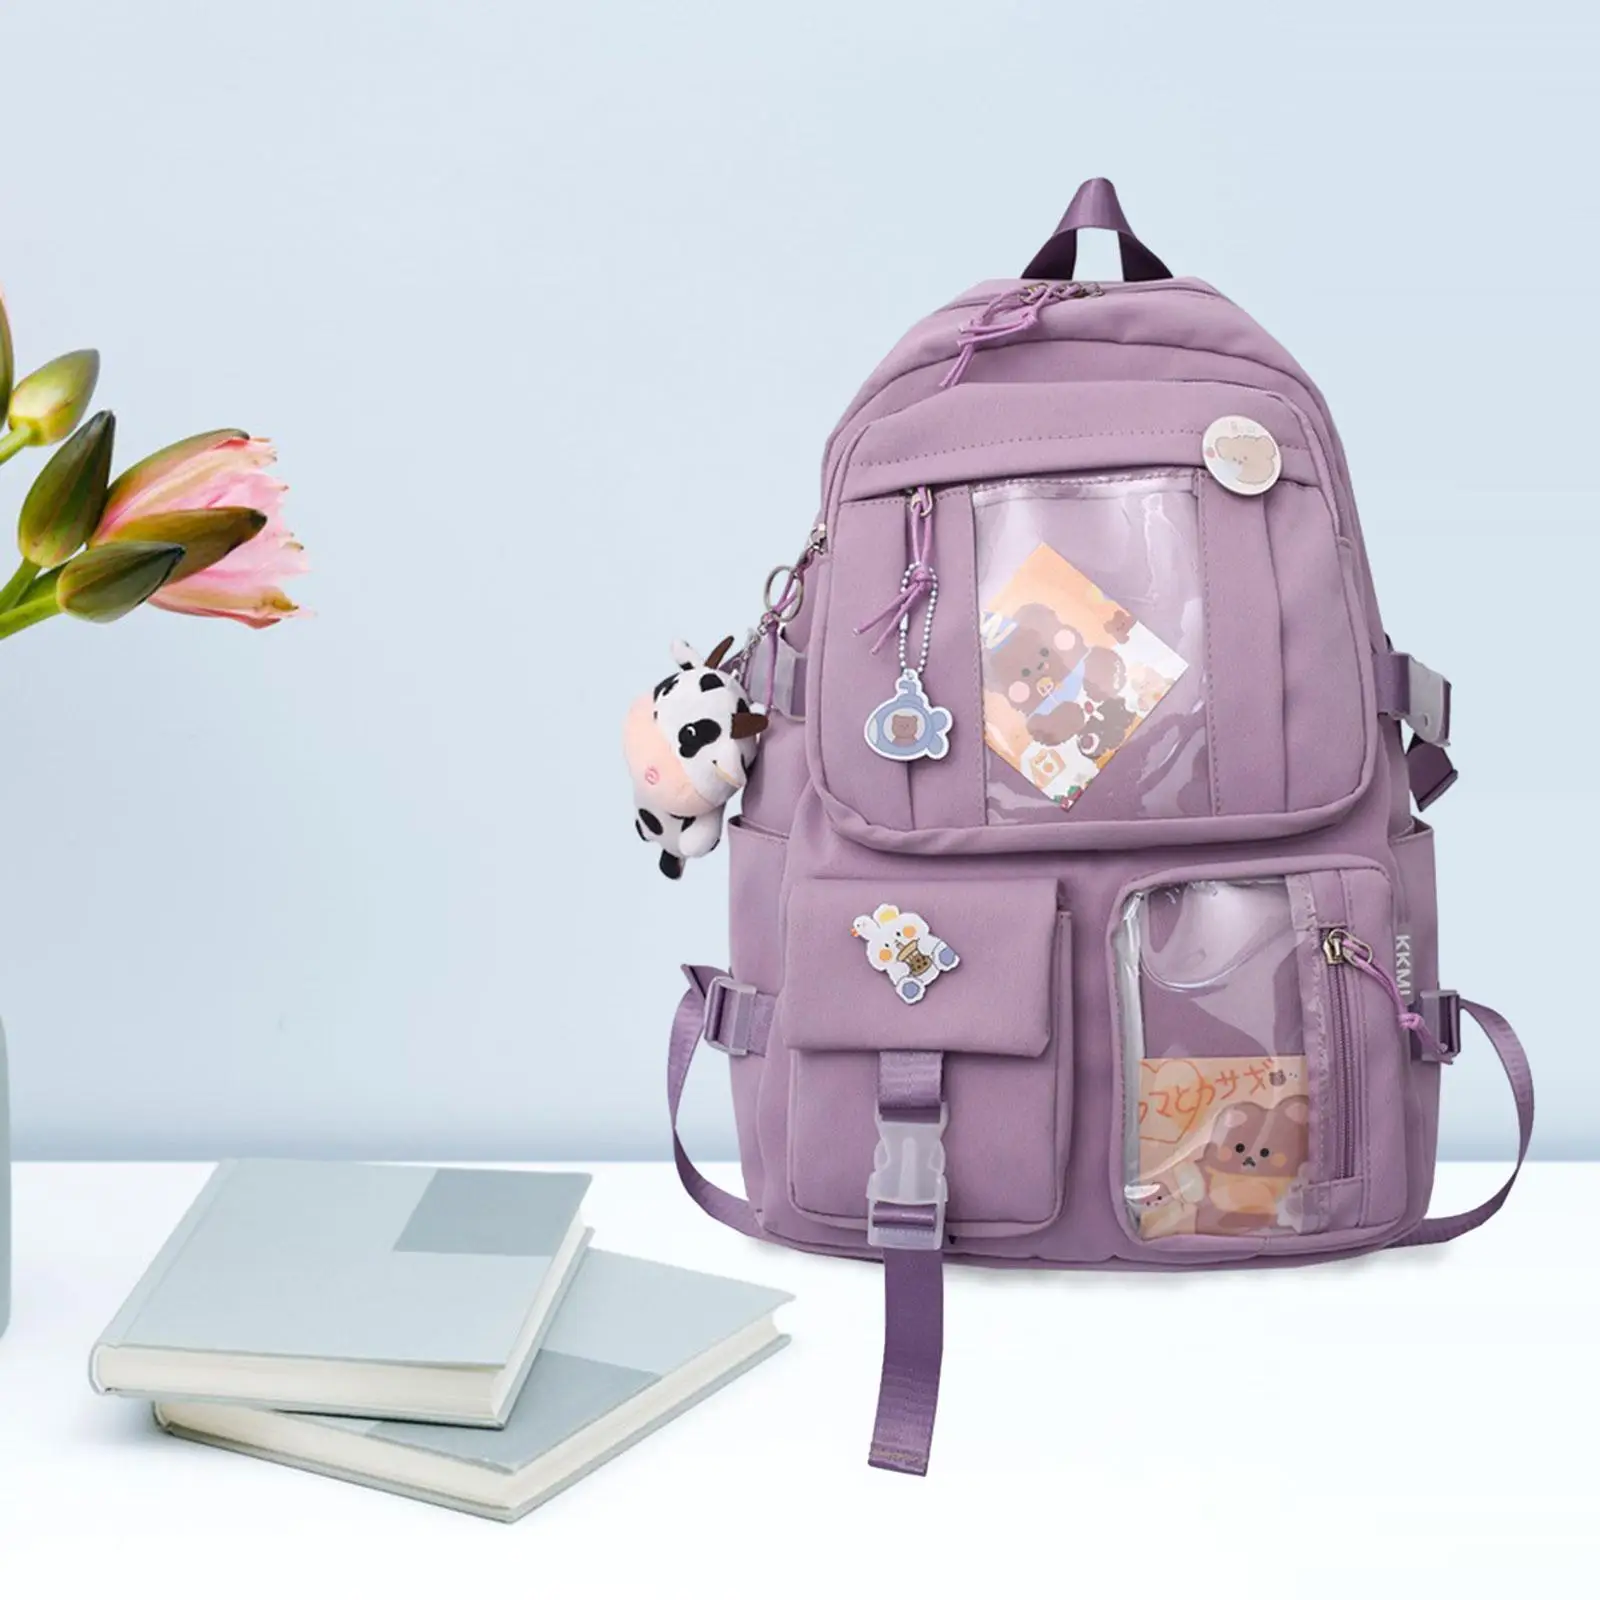 Women Backpack with Side Pockets Fashion Bookbag Travel Book Bags Schoolbag for Elementary Students Female Young Kids Girls Boys